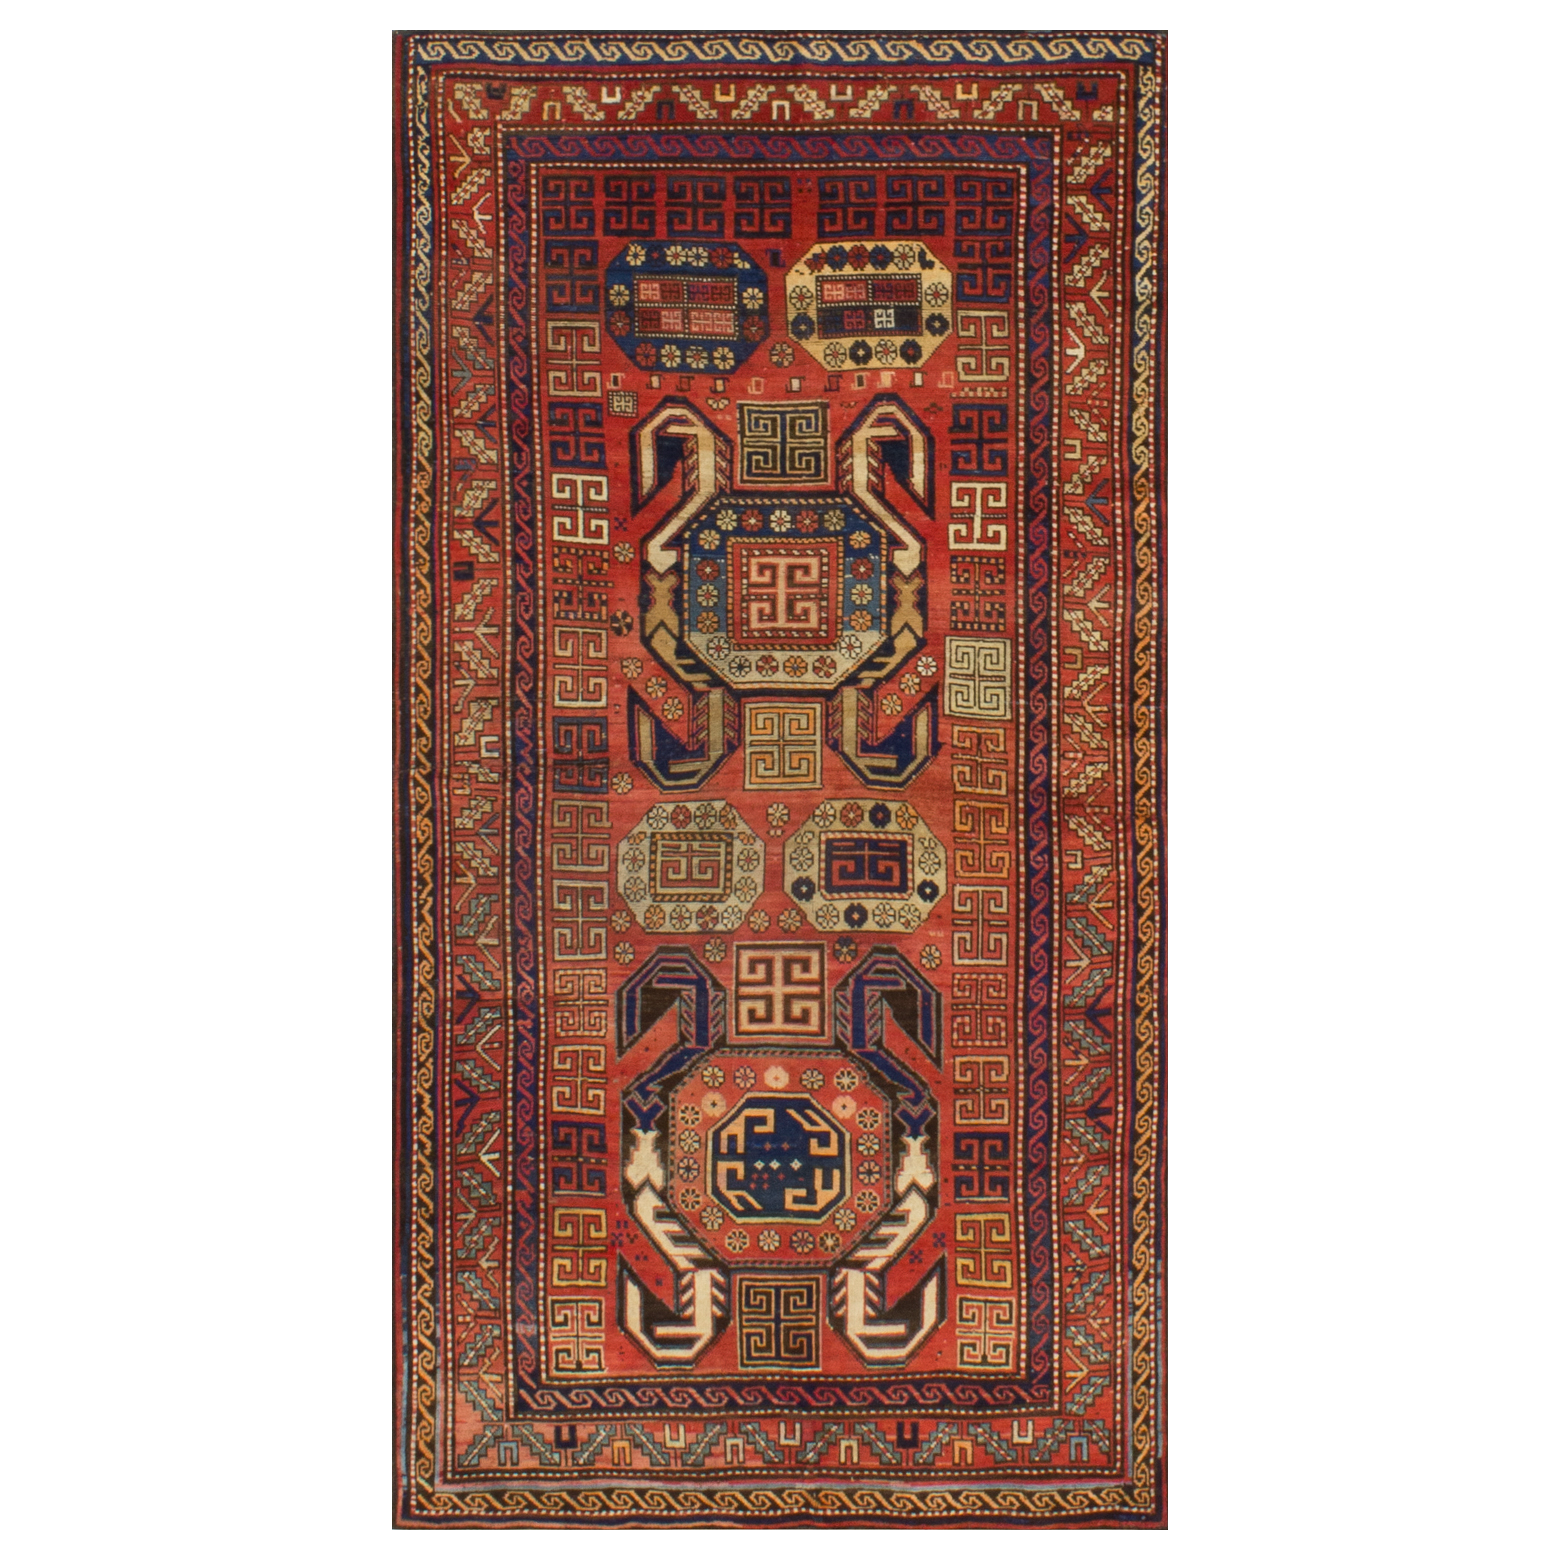 For generations, Elte has worked with expert local rug pickers throughout Morocco, Iran, Turkey and Europe to source vintage and antique rugs.